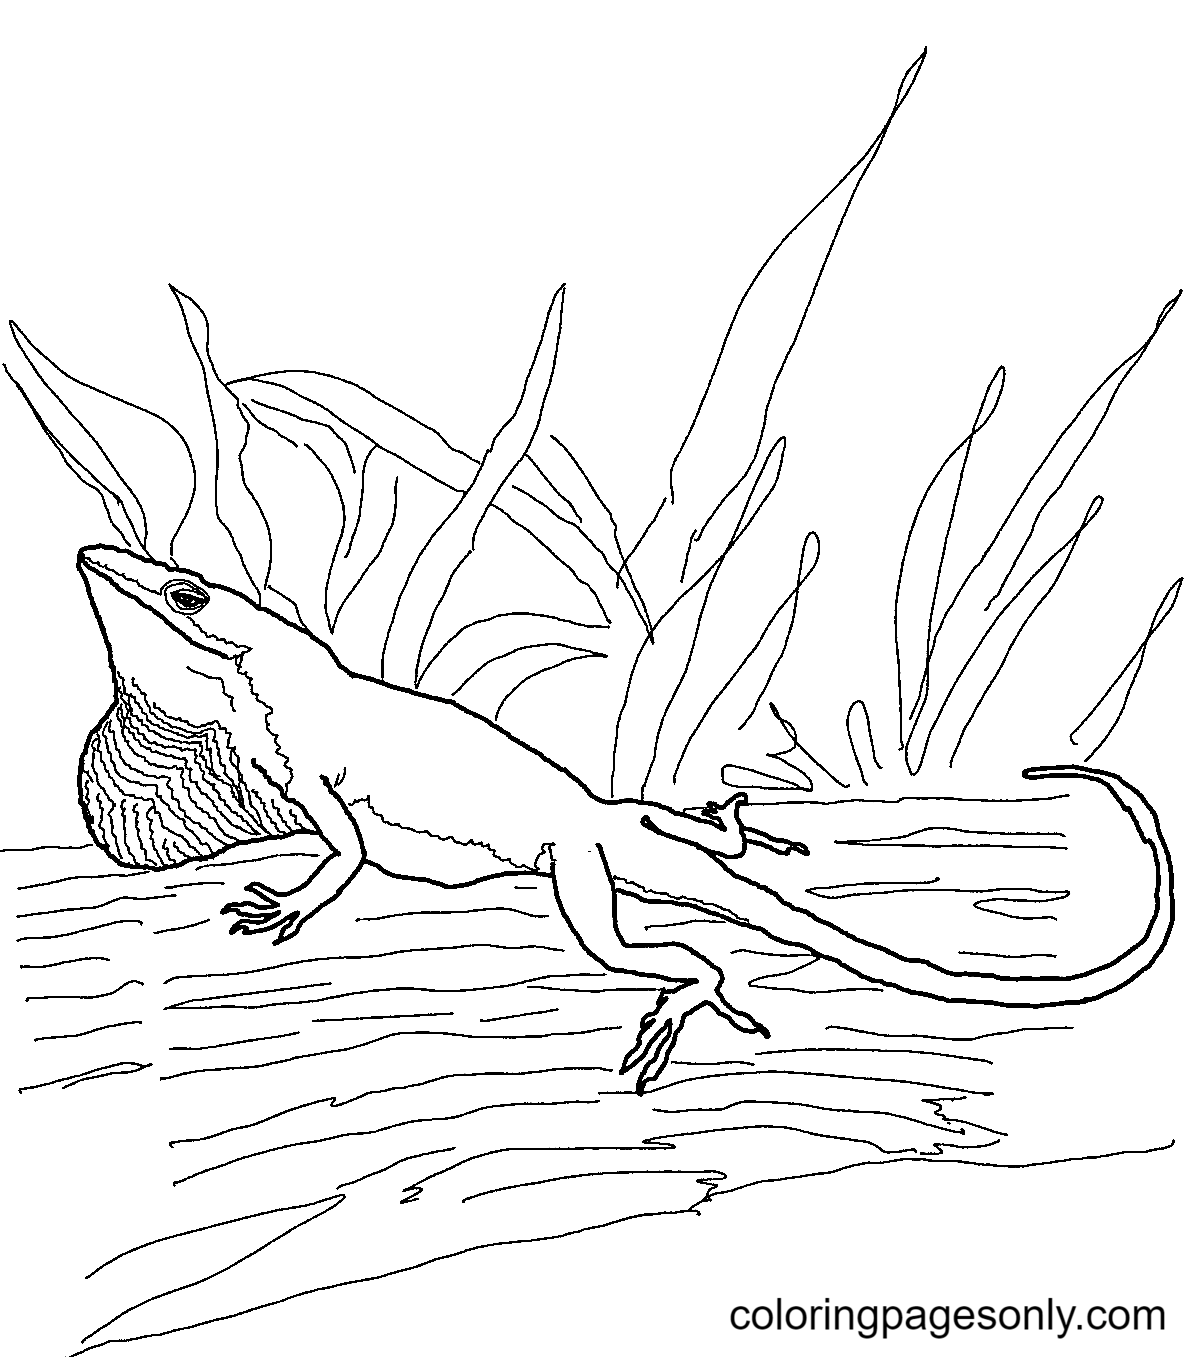 Green Anole Lizard Coloring Pages